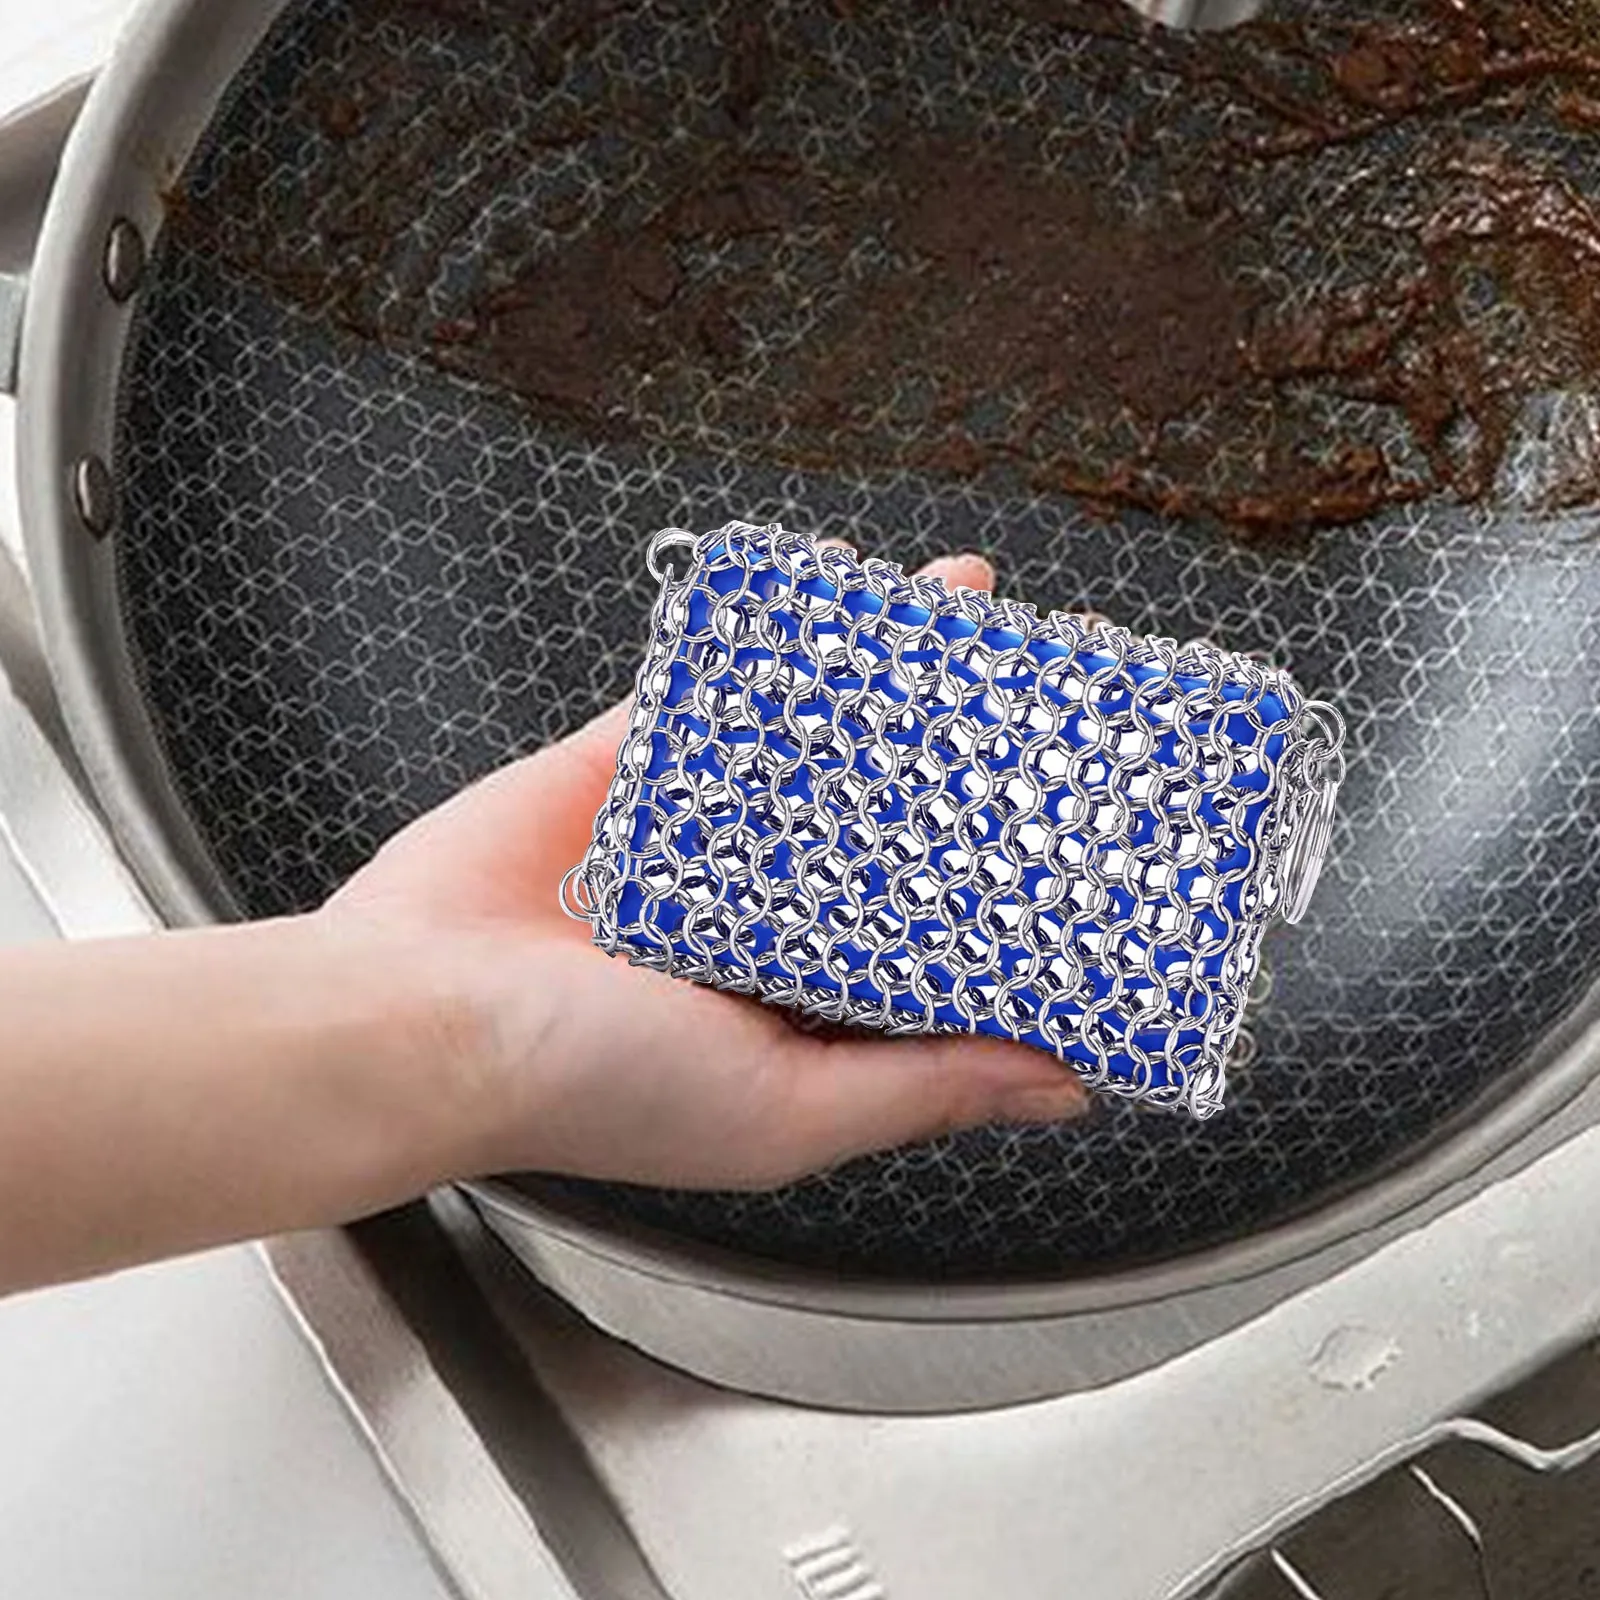 https://ae01.alicdn.com/kf/S39293486e76c48199aa035bc676d4c0cI/Square-Chainmail-Scrubbing-Pad-Stainless-Steel-316-Food-Grade-Silica-Gel-Washing-Pot-Brush-Screen-Oven.jpg